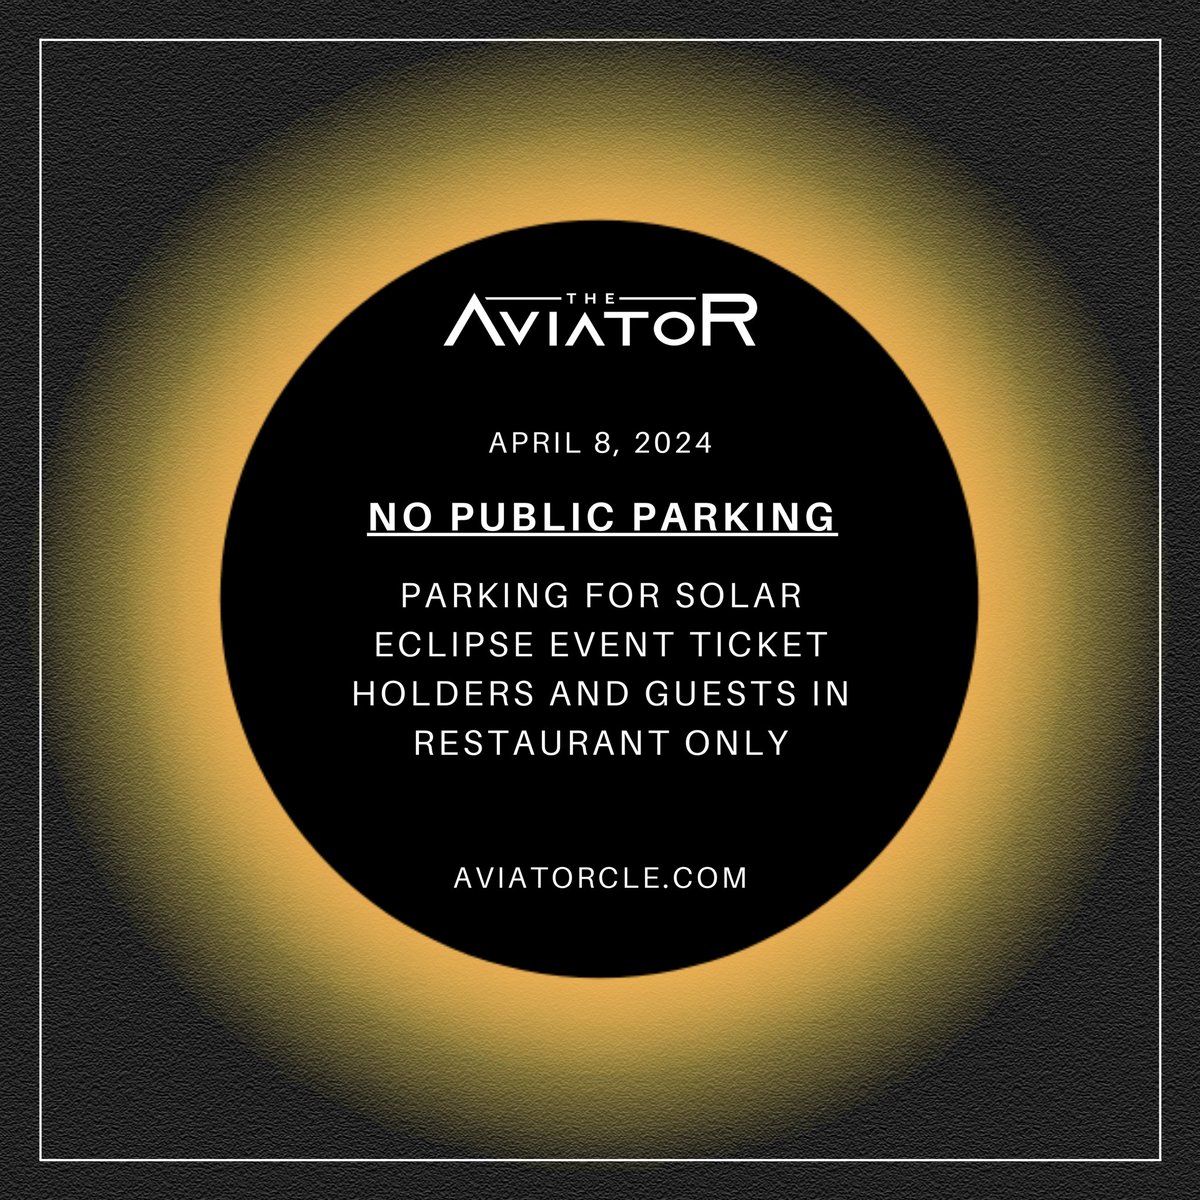 TODAY IS GOING TO BE EPIC.🌍☀️✨ Today (4/8), the parking lot will only be available for Solar Eclipse Event ticket holders and guests in the restaurant. NO PUBLIC PARKING will be available. We are so excited for this once-in-a-lifetime experience! 🕶️🌓✨🤩